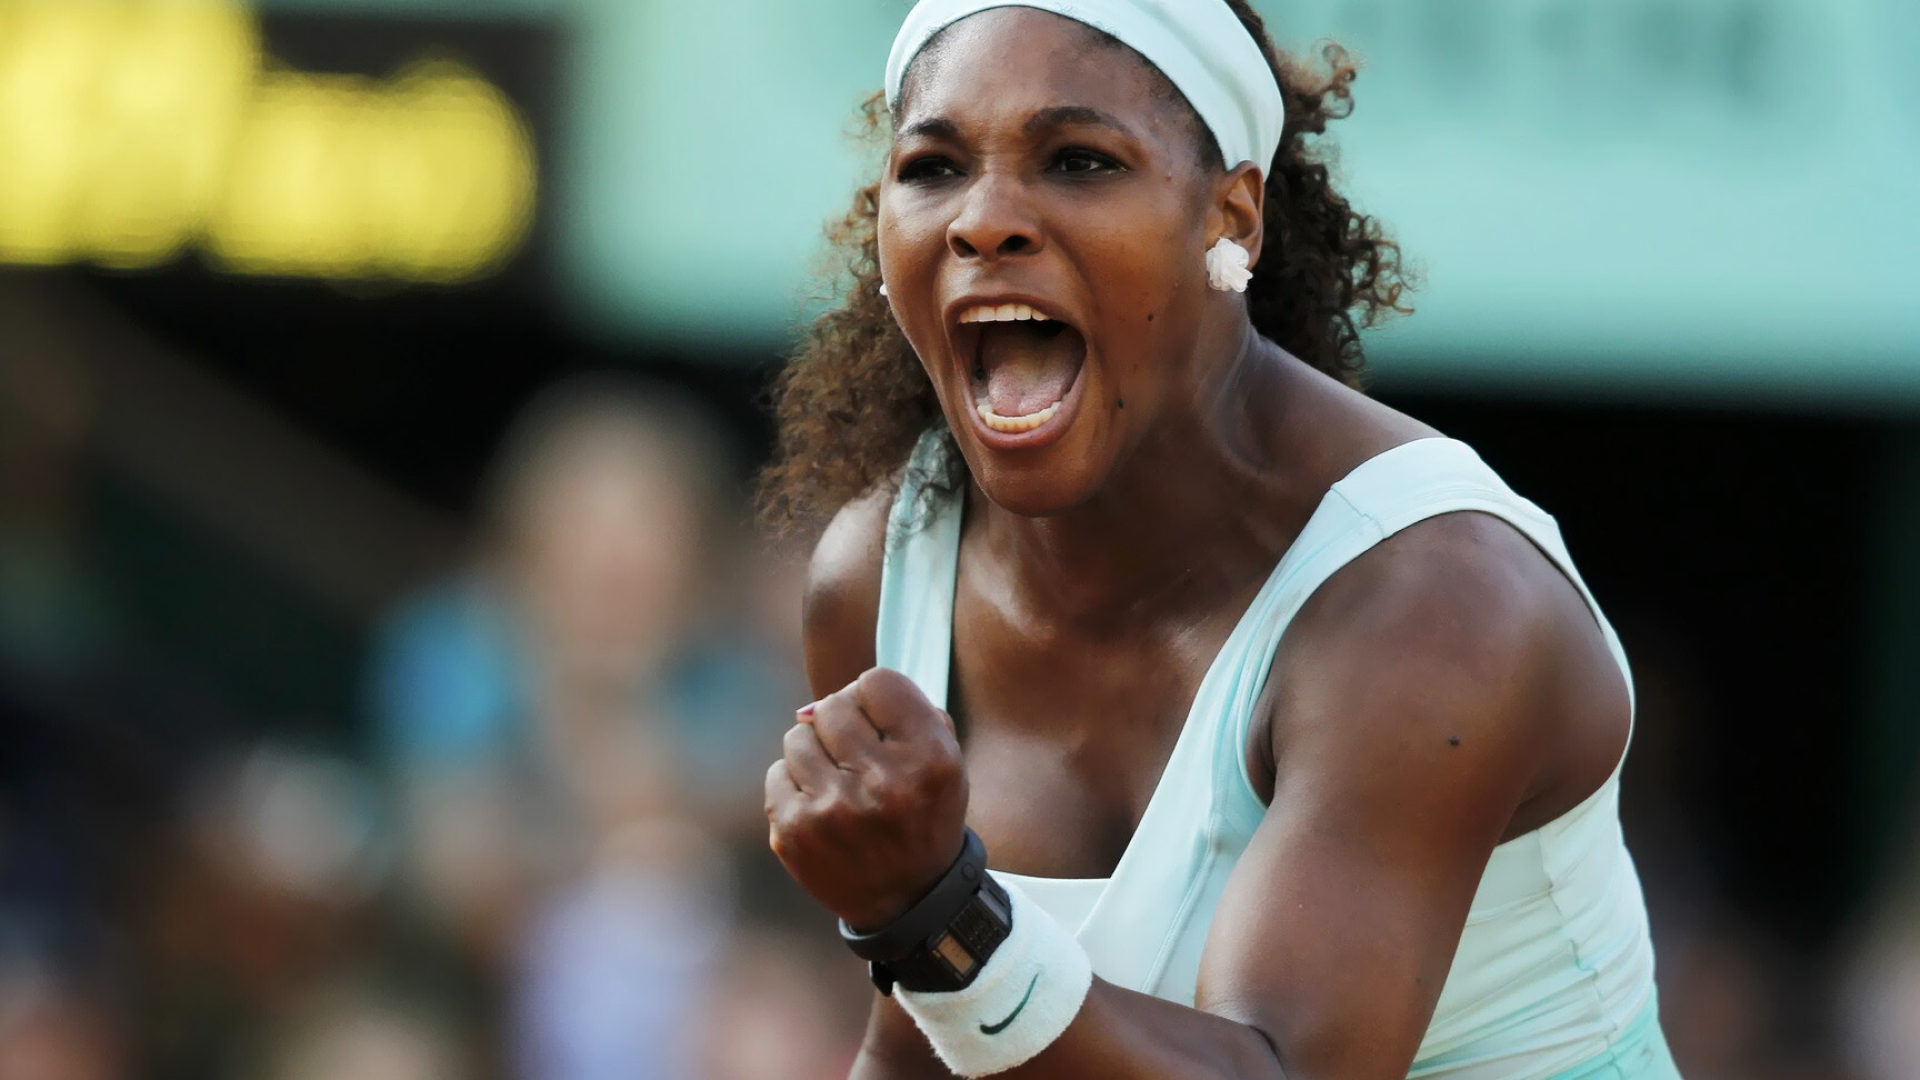 Serena Williams: She defeated her sister Venus to win the 2002 French Open. 1920x1080 Full HD Background.